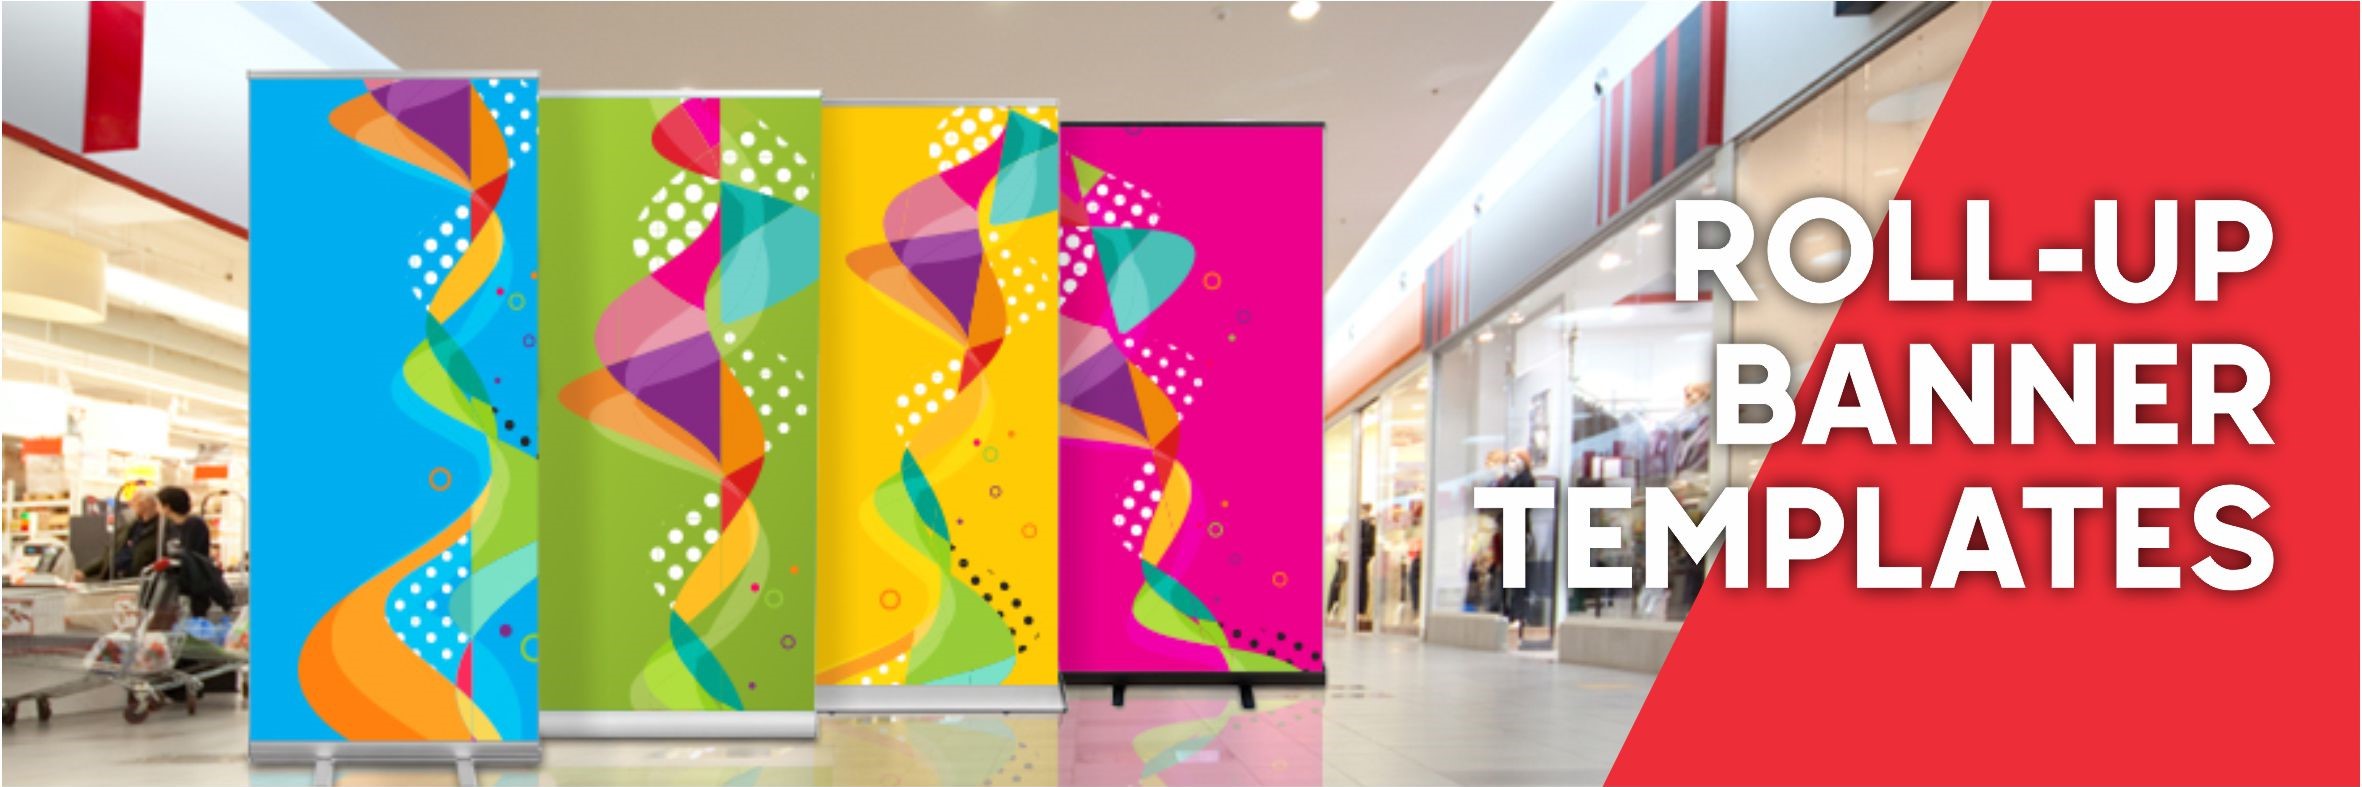 Roll Up Banner Templates